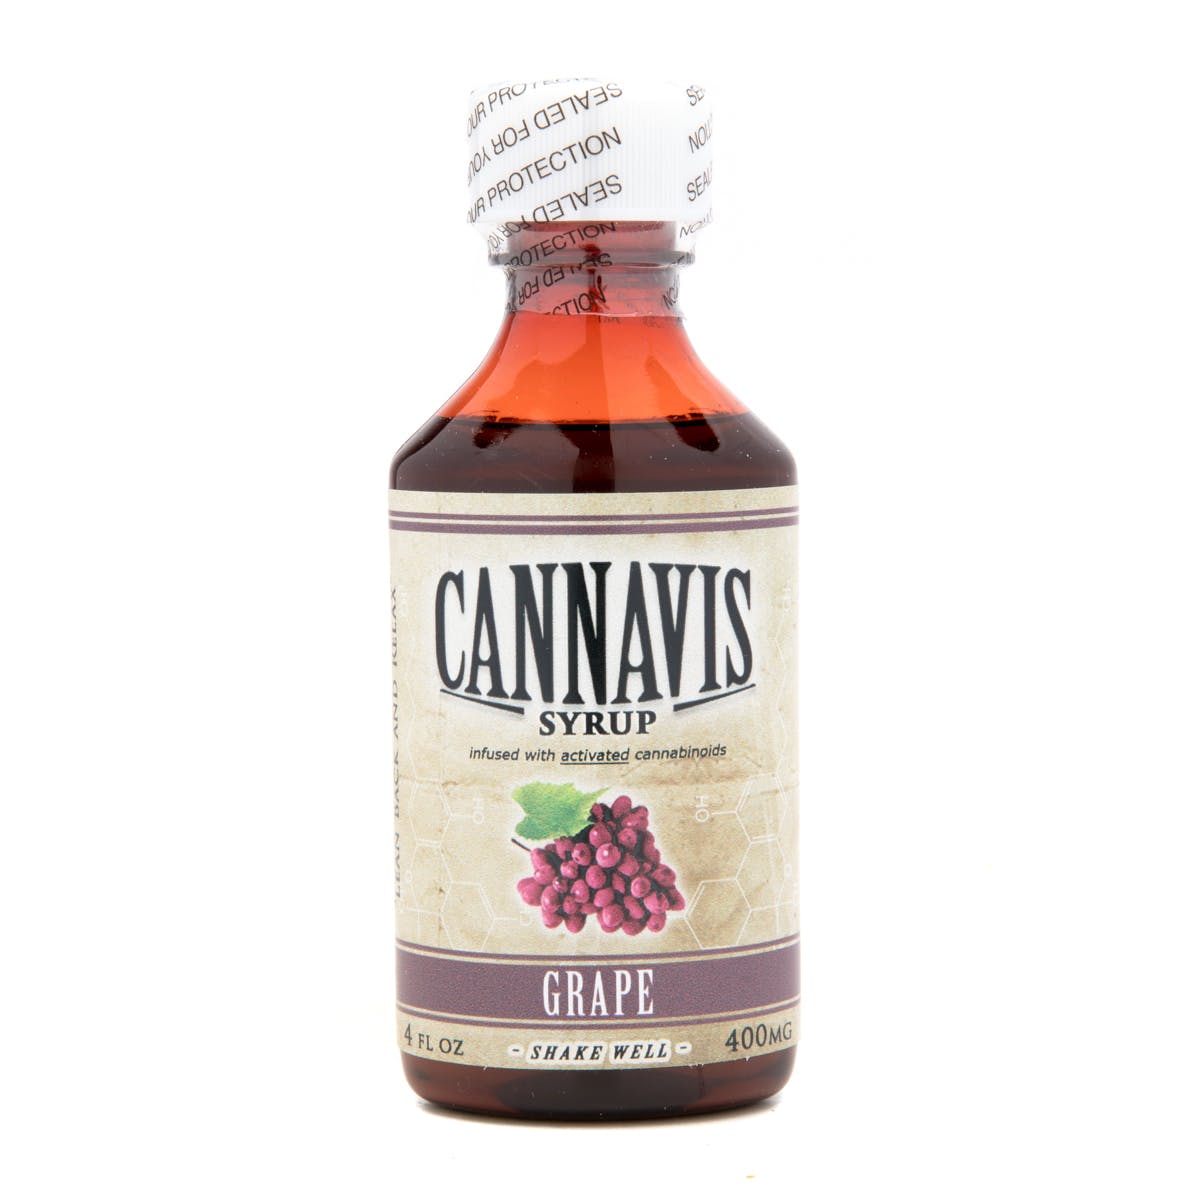 marijuana-dispensaries-the-presidential-collective-in-los-angeles-cannavis-syrup-2c-grape-400mg